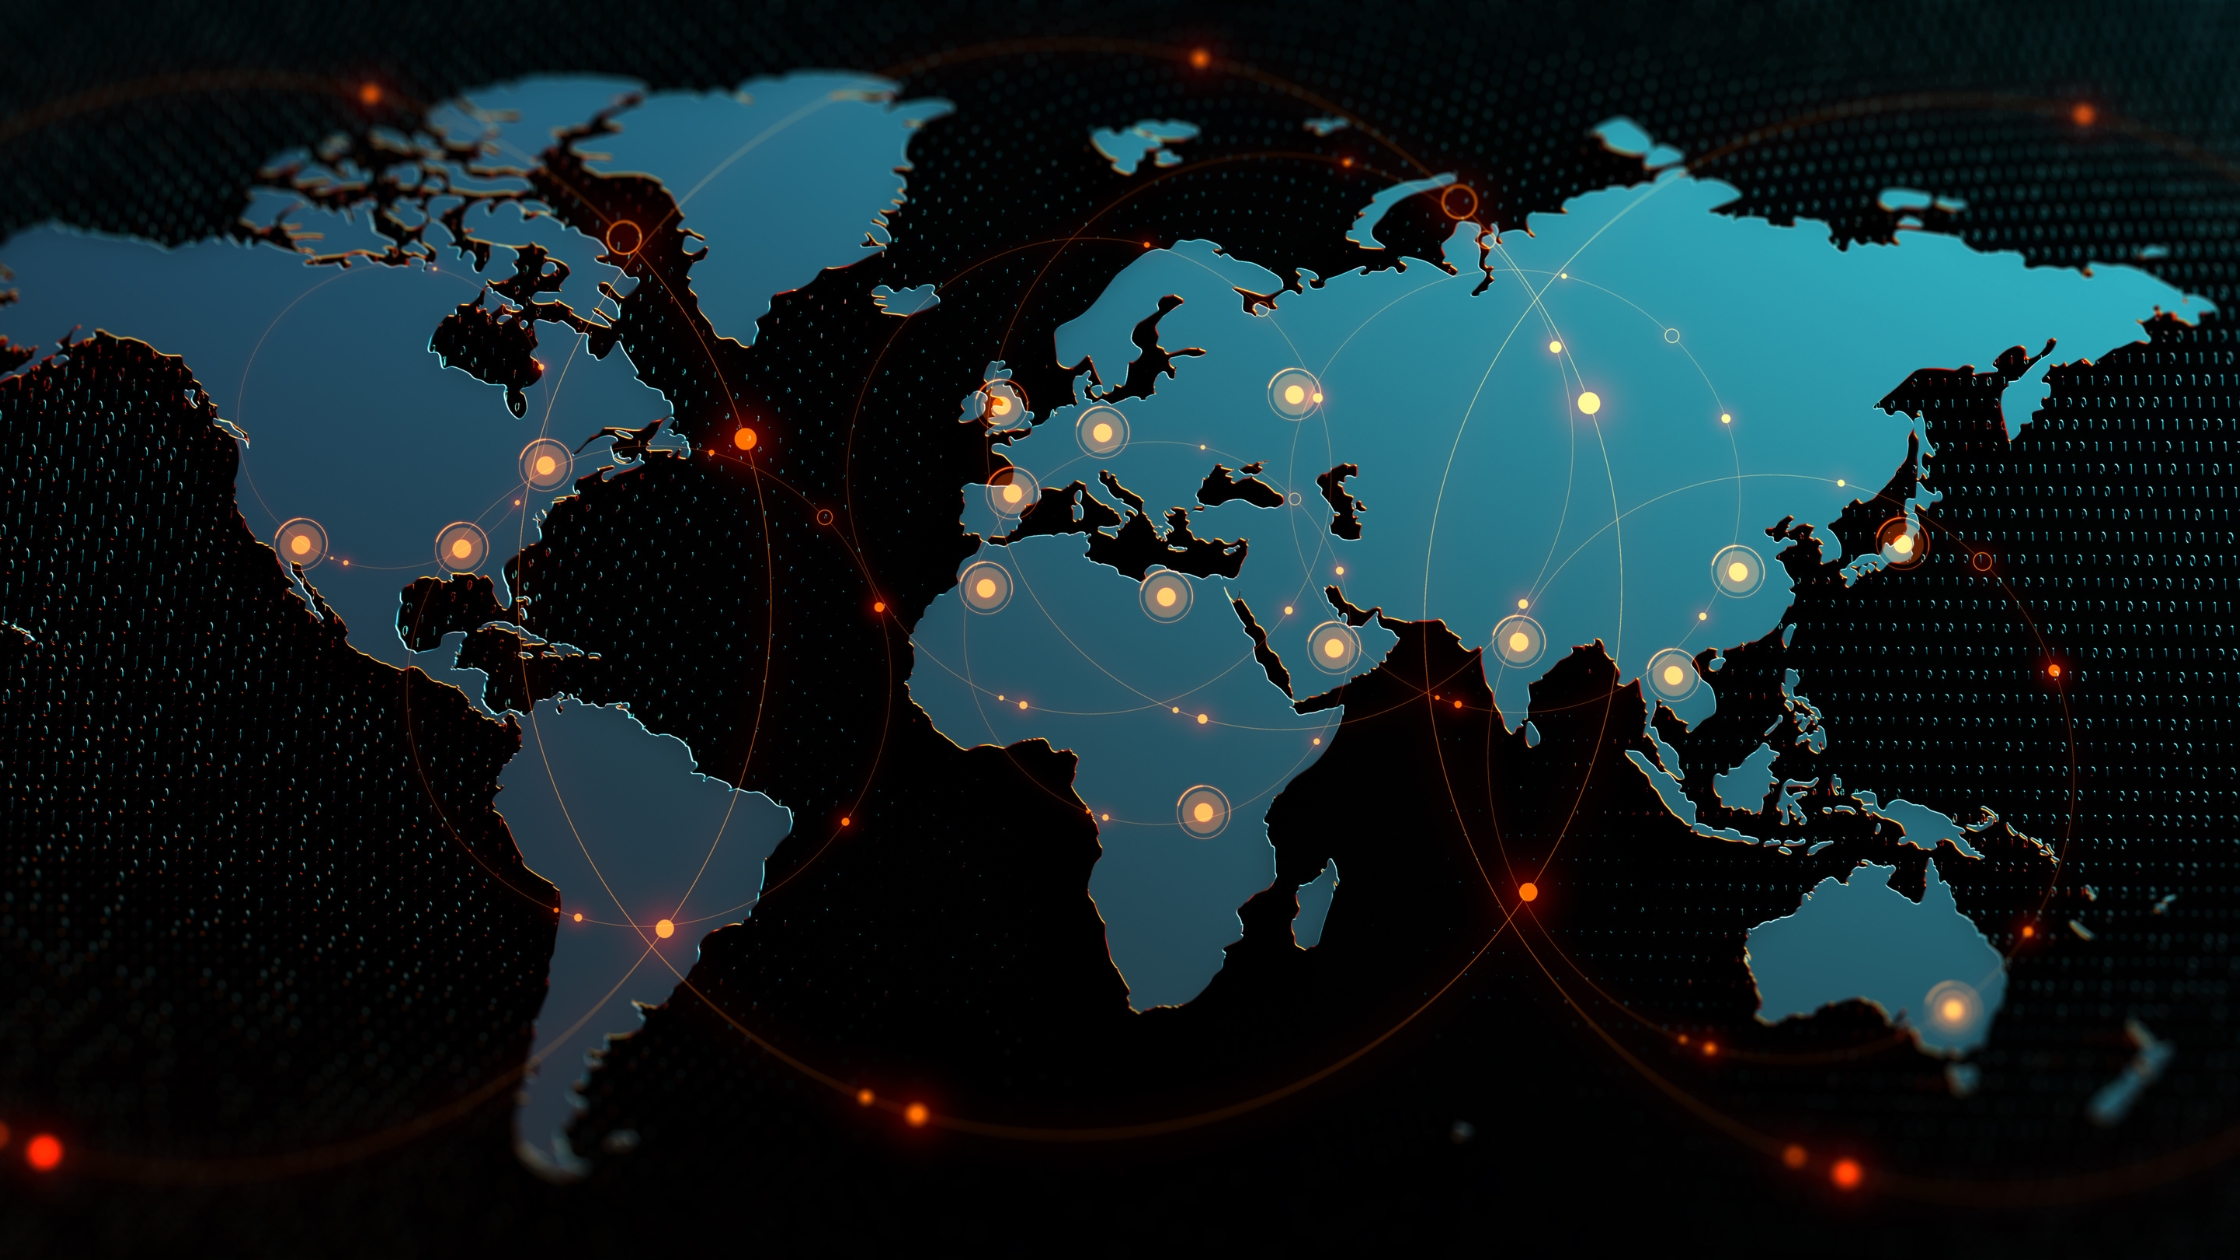 International Debt Recovery Solutions: A digital world map with highlighted points interconnected by lines, symbolizing The Baker Group's global network for international debt recovery solutions.